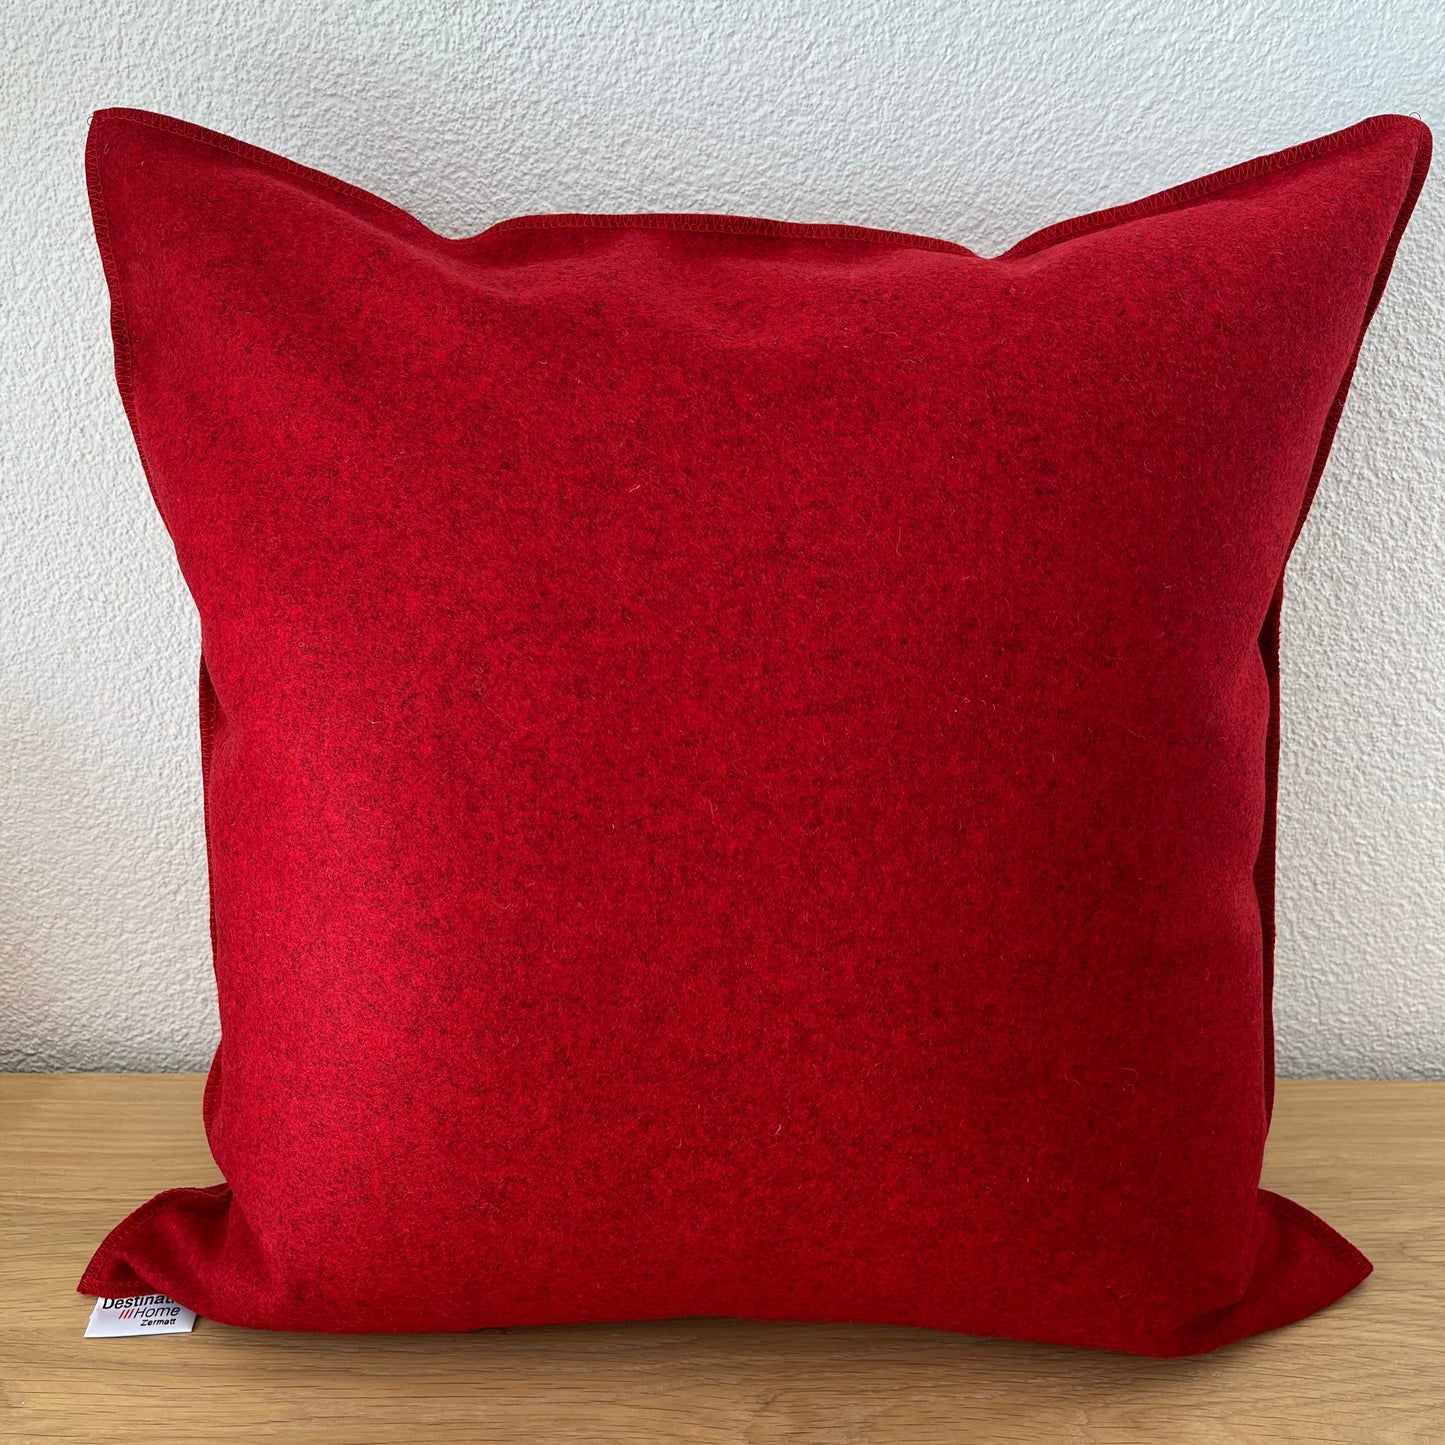 Cushion cover with handknitted details, red